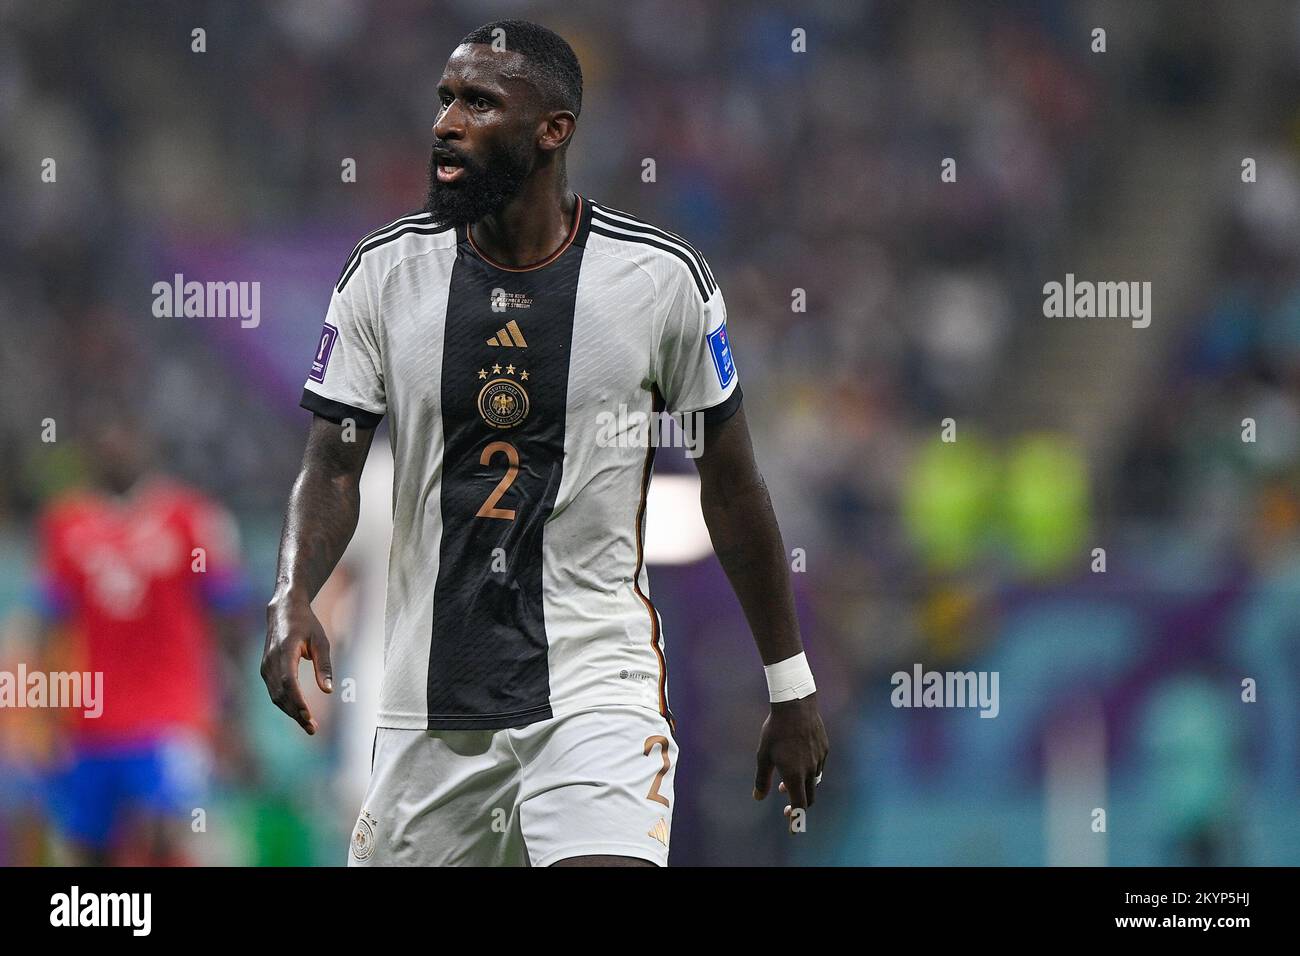 AL KHOR, QATAR - DECEMBER 1: Antonio Ruediger of Germany looks on during the Group E - FIFA World Cup Qatar 2022 match between Costa Rica and Germany at the Al Bayt Stadium on December 1, 2022 in Al Khor, Qatar (Photo by Pablo Morano/BSR Agency) Stock Photo